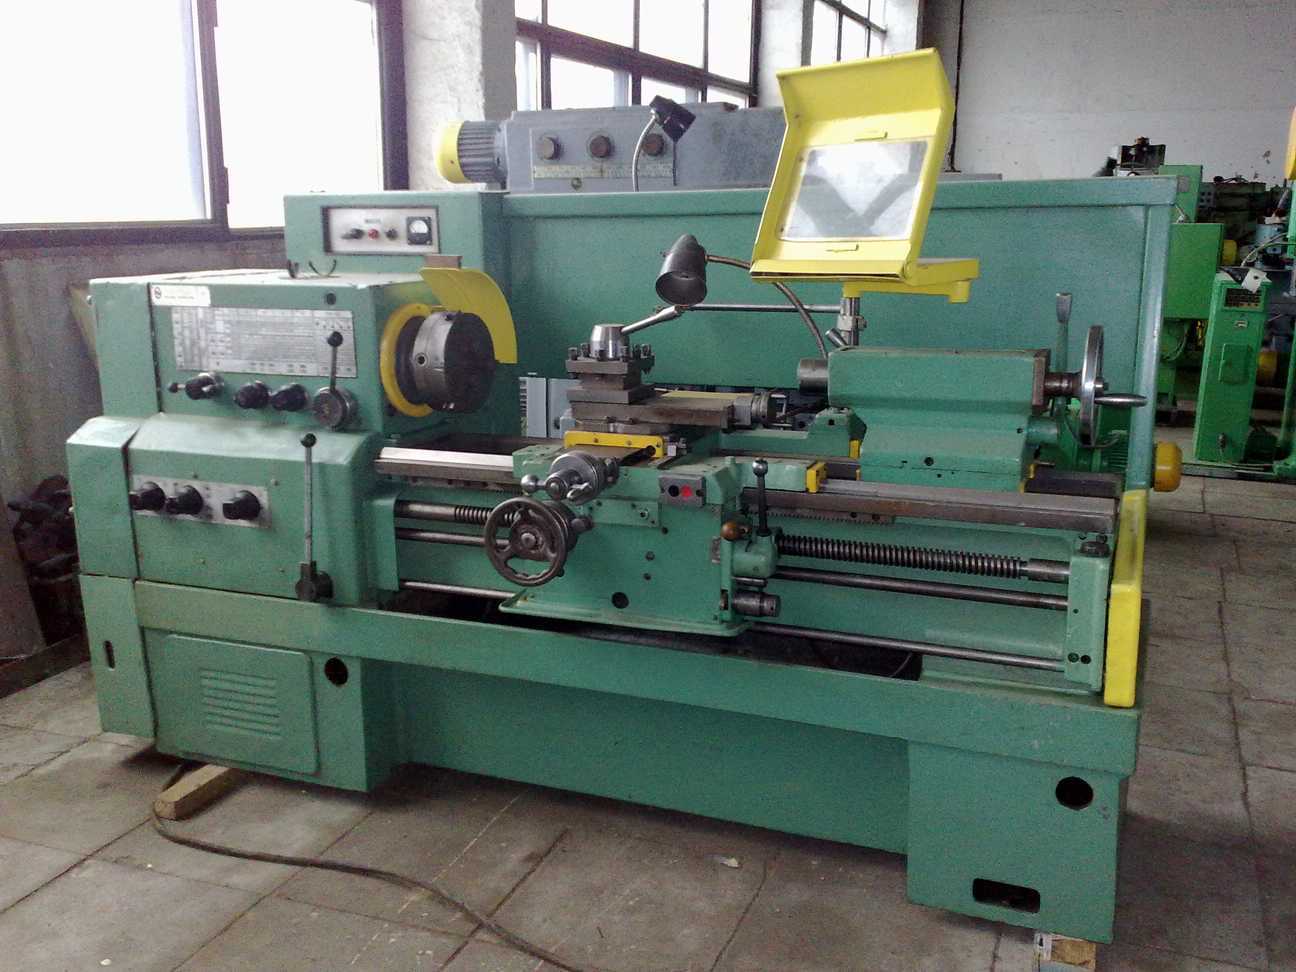 Semiautomatic lathe, Russian lathe pictures - DIYbanter